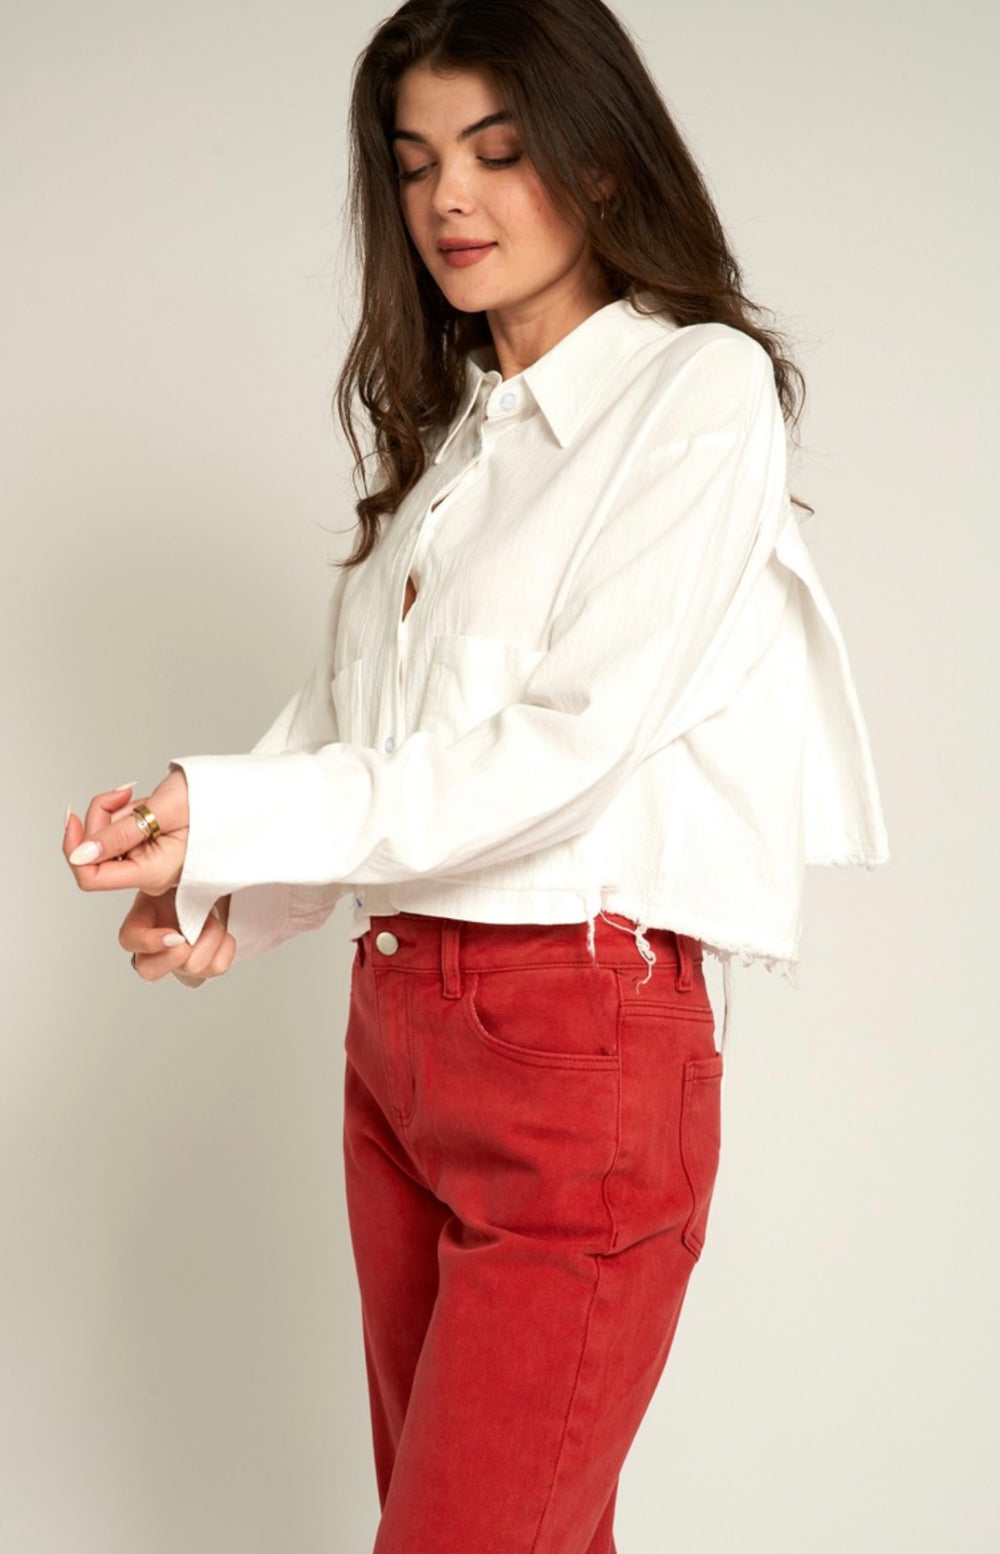 Long Sleeve Button up CroppedTop White